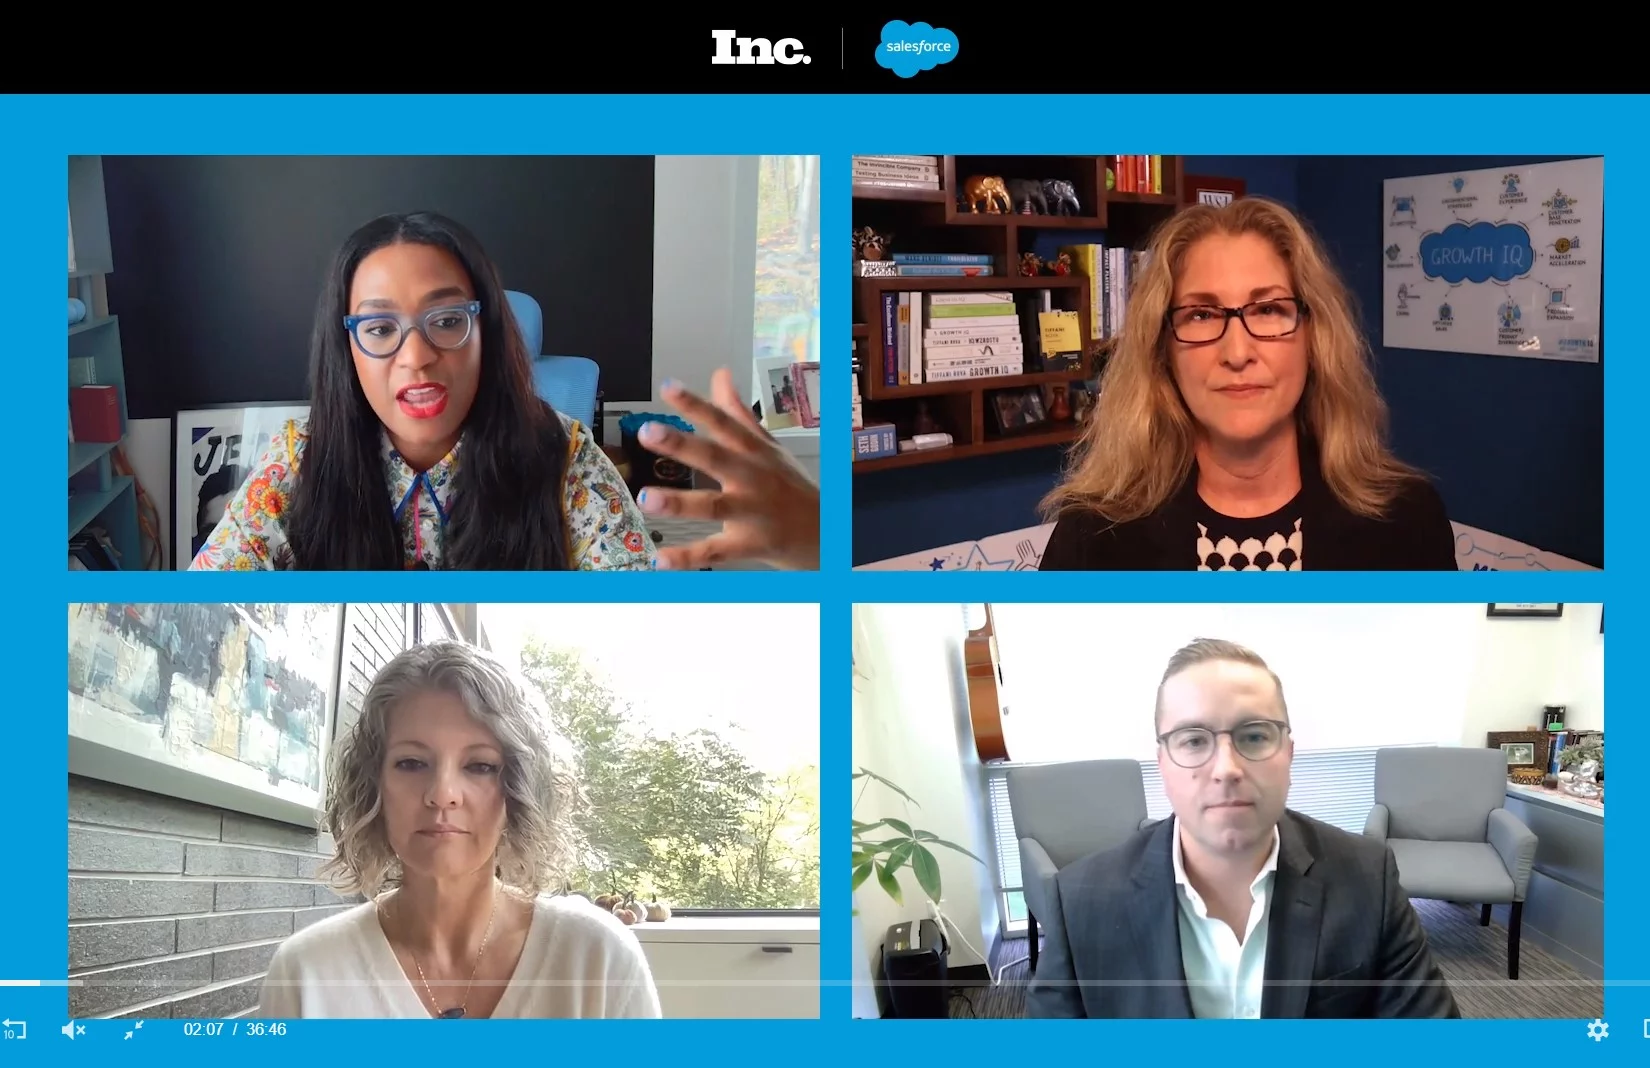 Clint Armstrong, bottom right, shared his staffing expertise with Inc. Magazine and fellow executives at an 11/28/2022 webinar on employee experience.